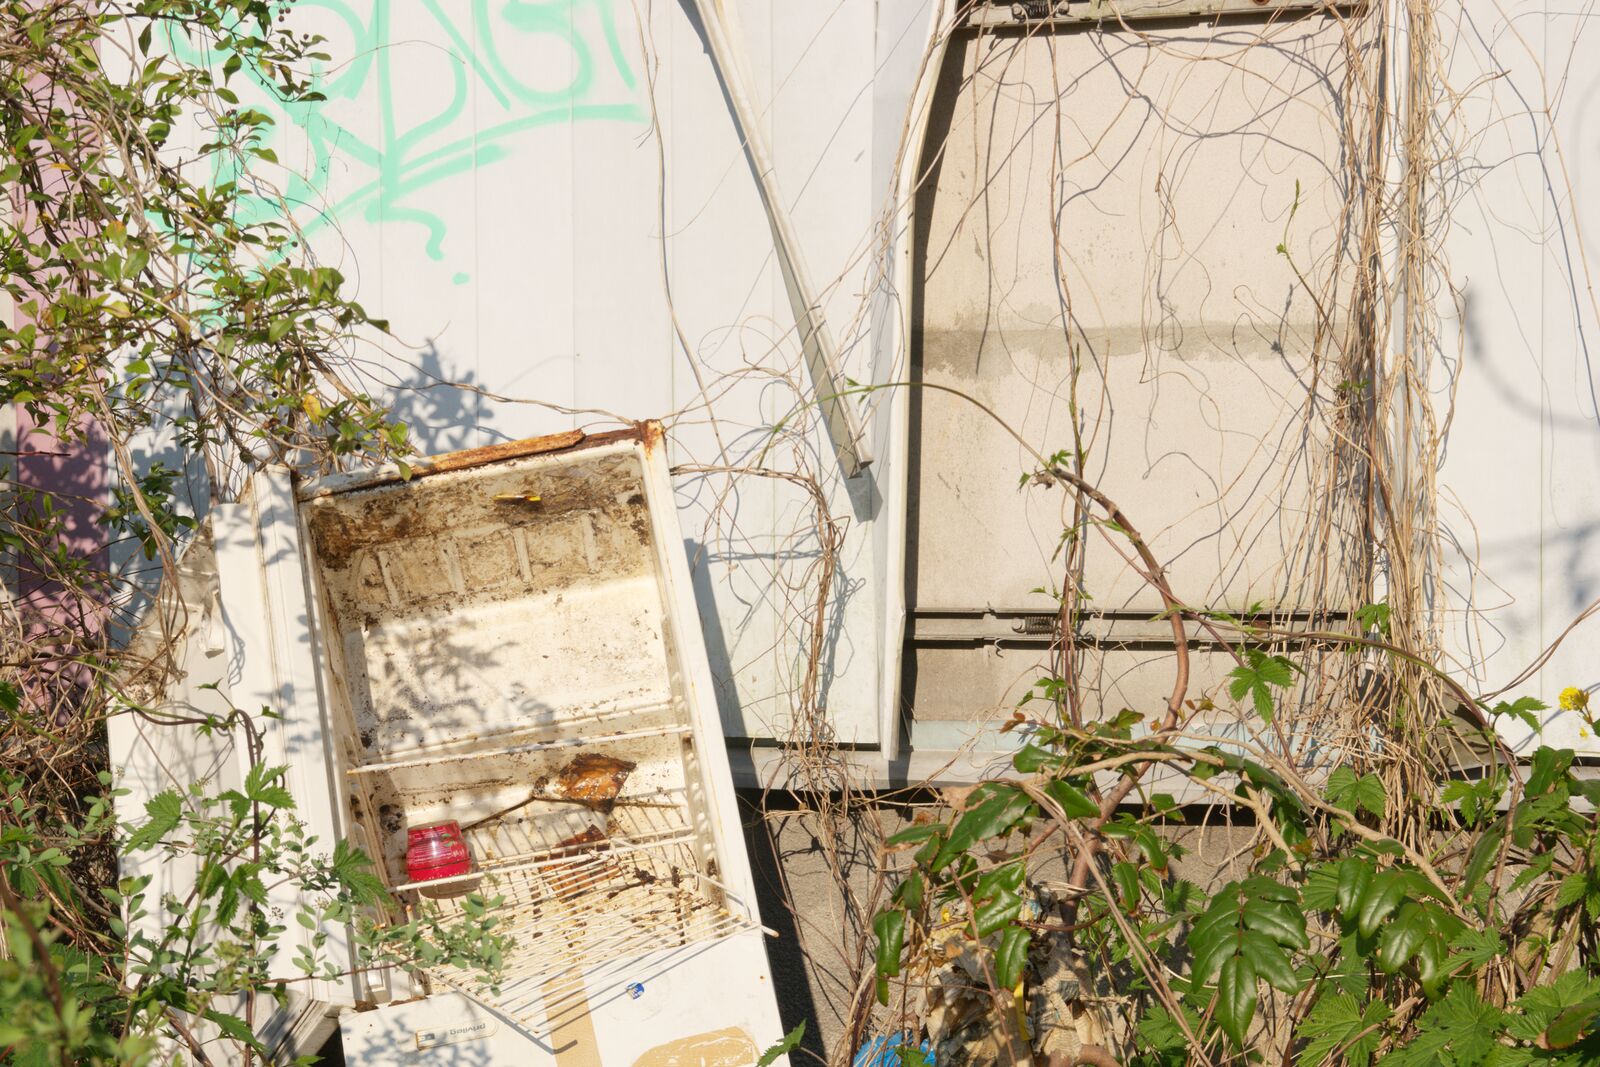 Photograph: a wall in bright sunlight, sharp shadows. The wall is covered in blackberry vines, some graffitti. There's a boarded up door, and a discarded, door-less fridge. The fridge is dirty inside, and there's a weird red jug.